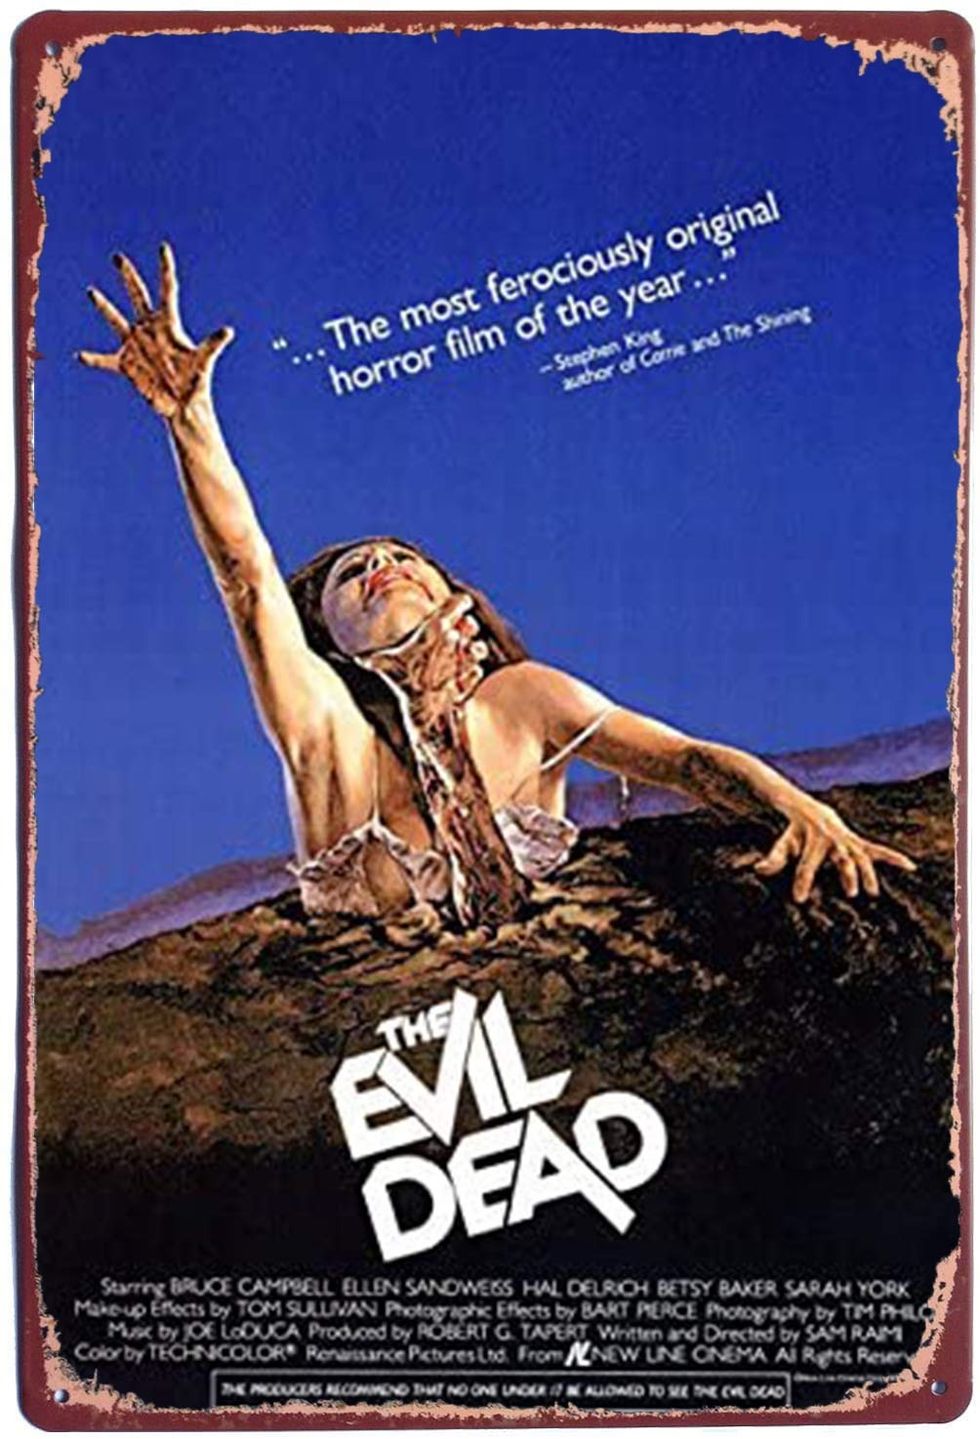 New EVIL DEAD RISE Poster Feels Like An '80s Throwback